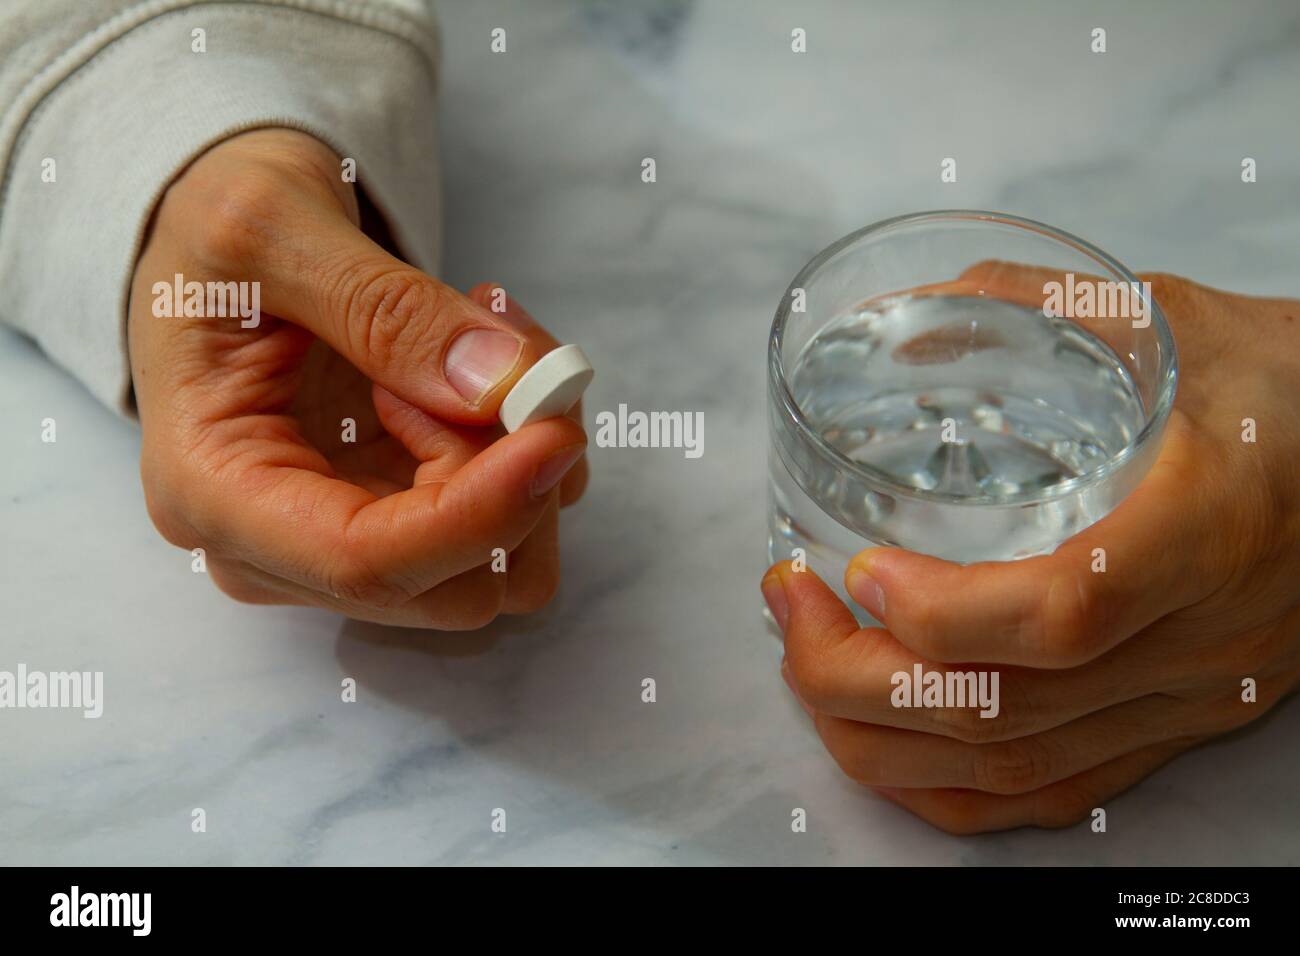 A caucasian woman is holding a white pill in one hand and firmly gripping a glass of water on the other hand. She is about to take the pill. Stock Photo